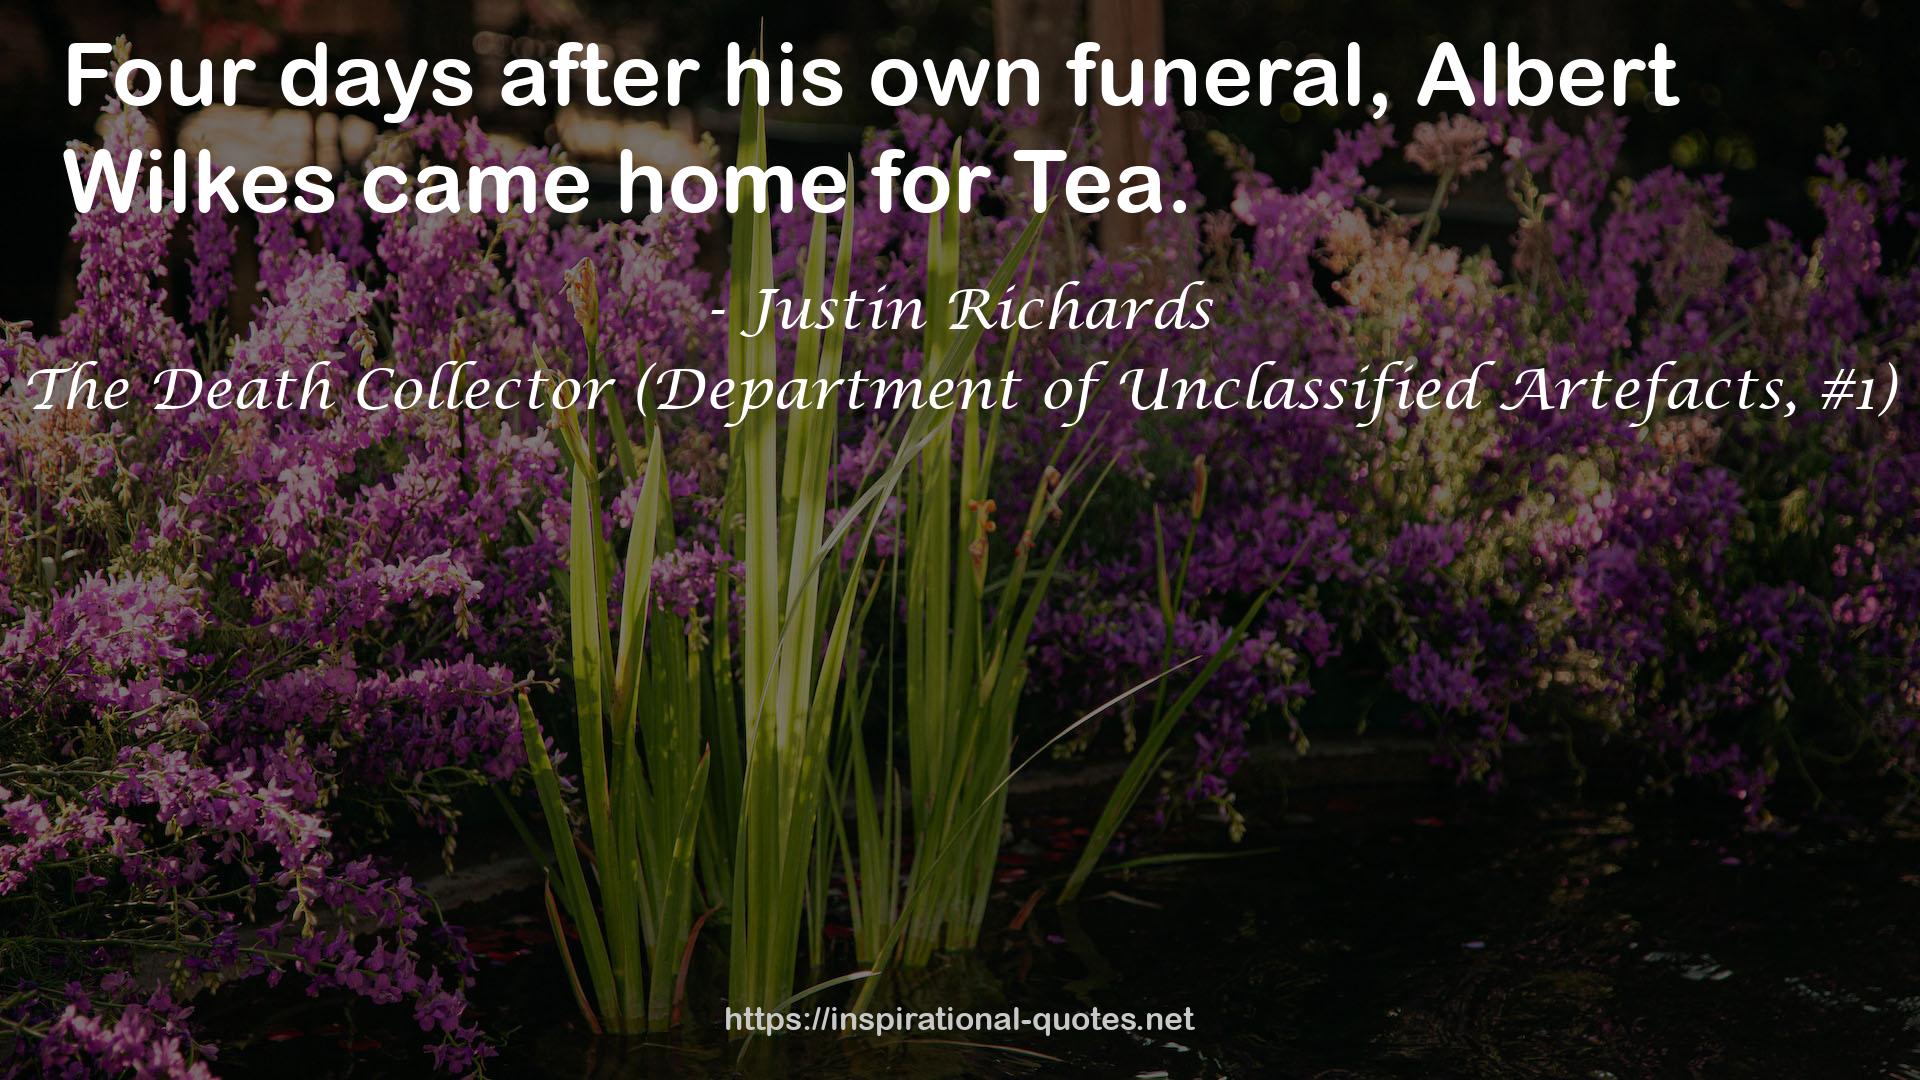 The Death Collector (Department of Unclassified Artefacts, #1) QUOTES